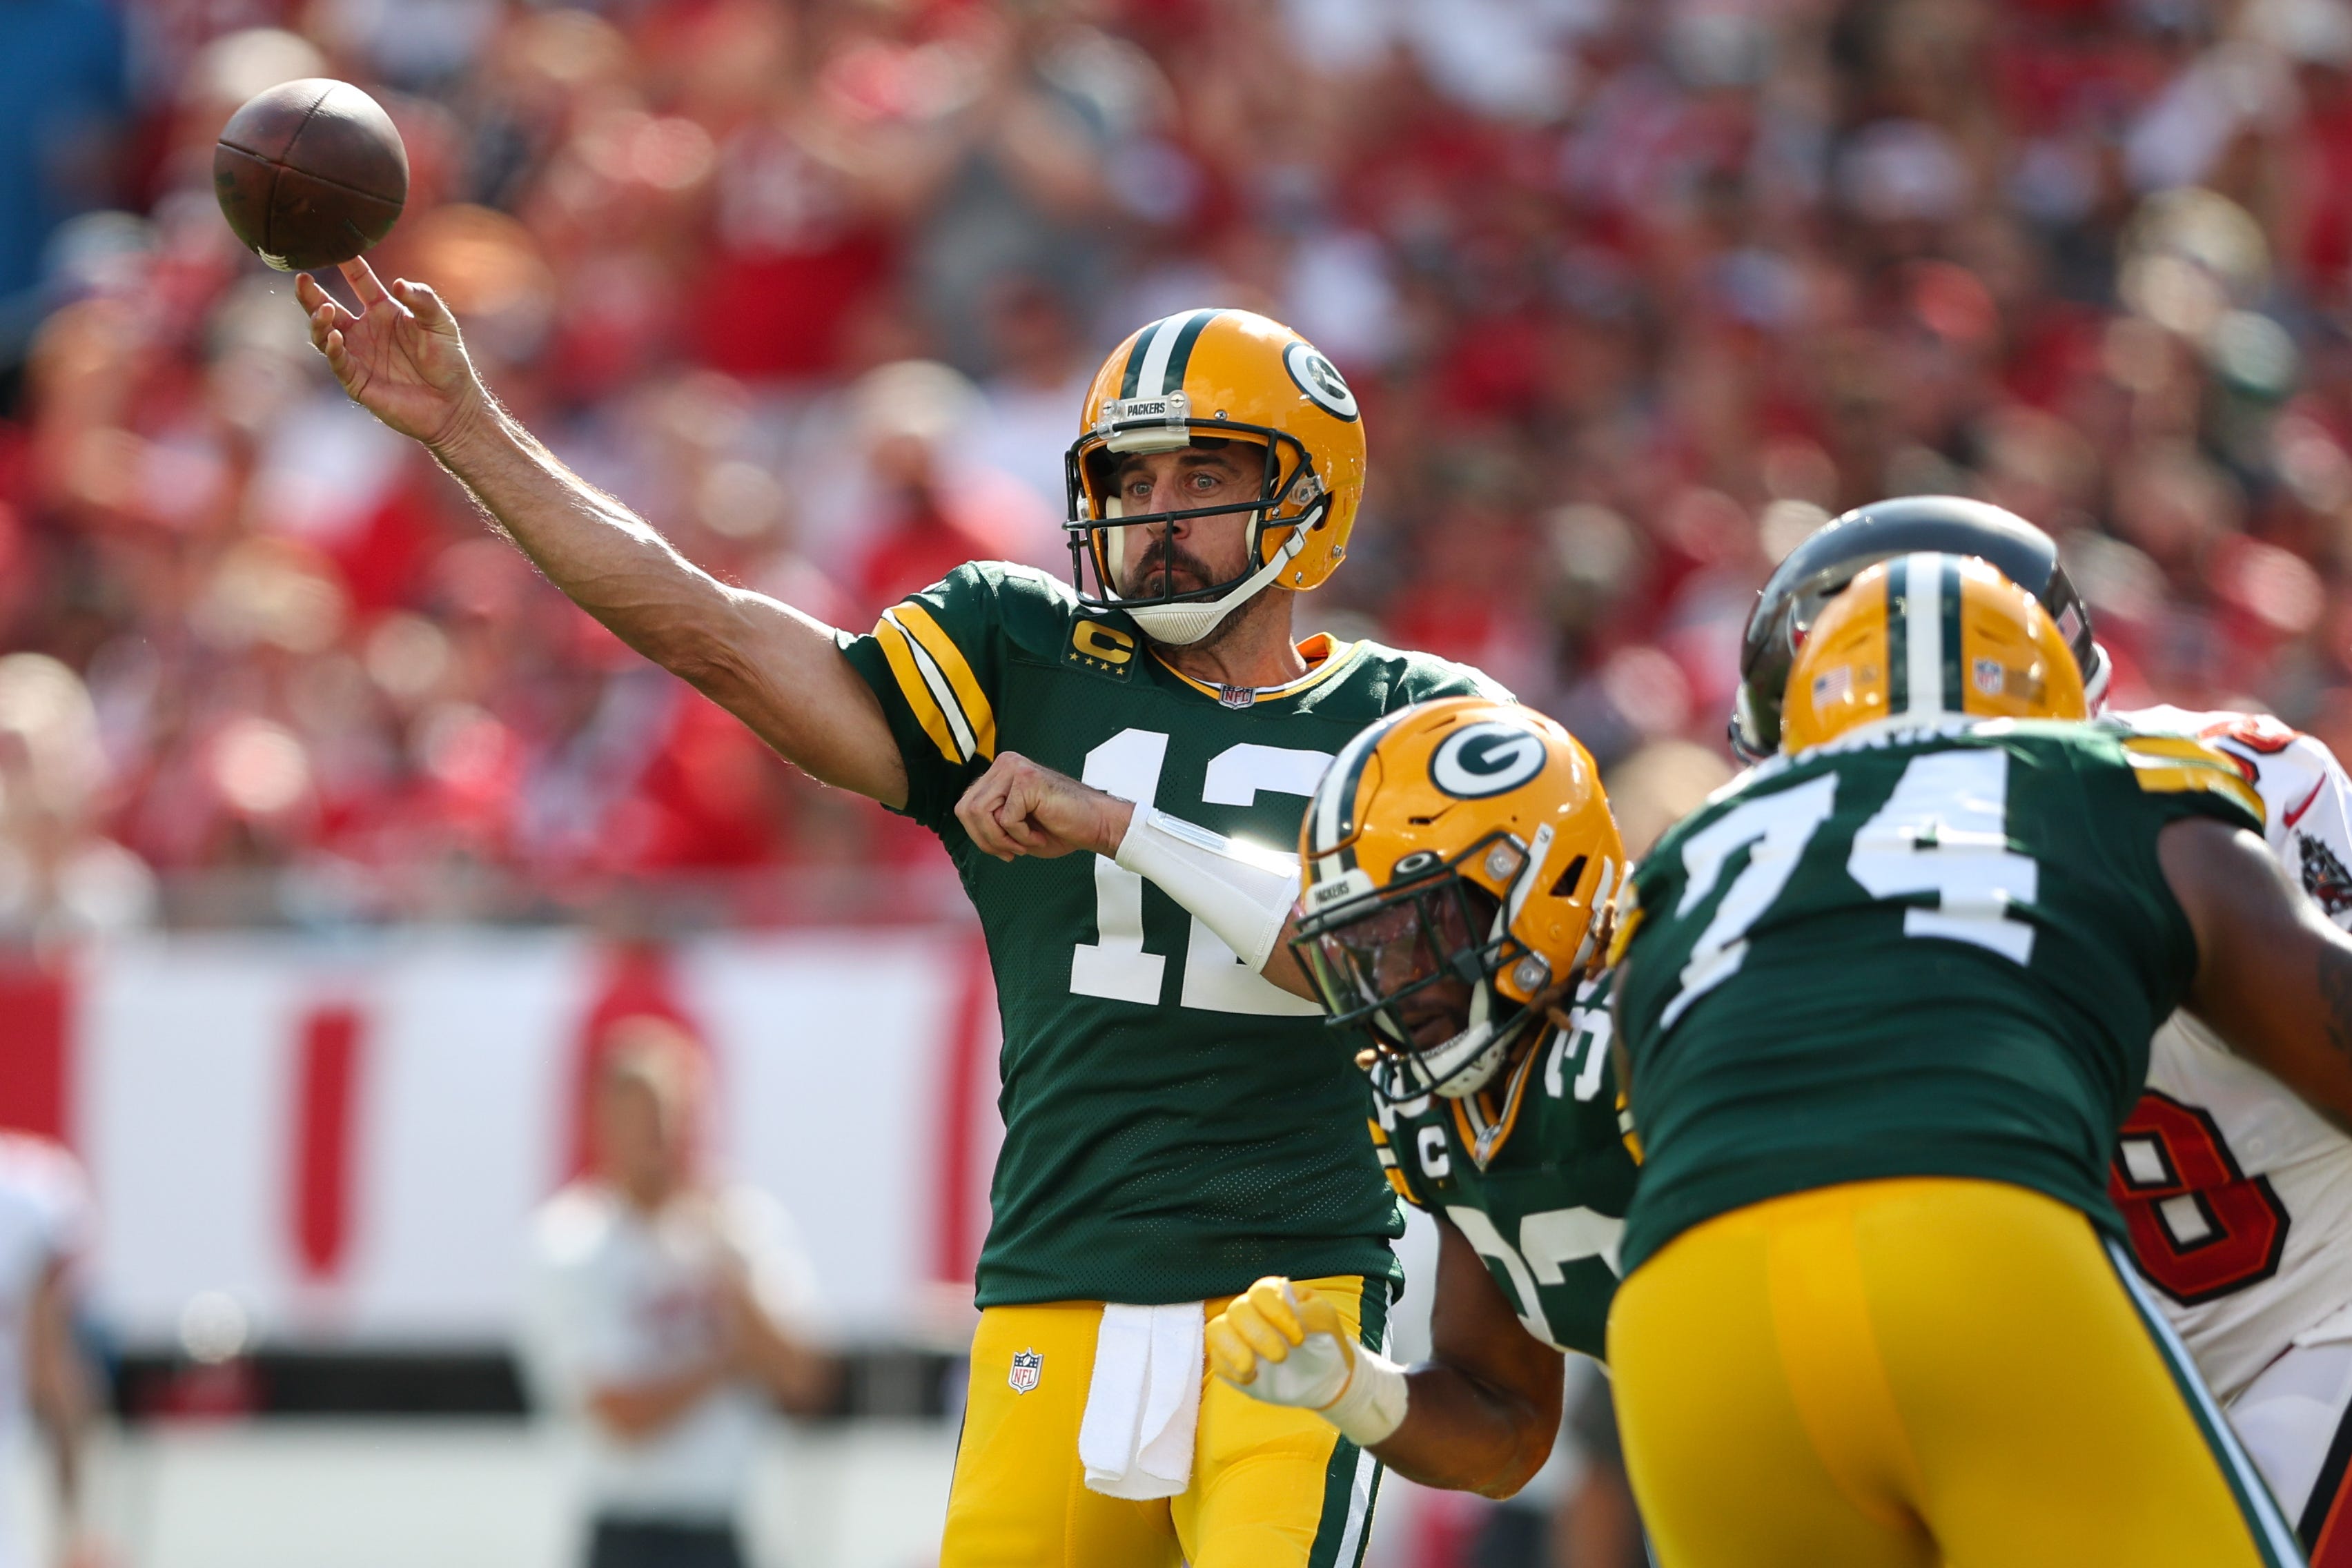 Green Bay Packers quarterback Aaron Rodgers drops back to pass against the Tampa Bay Buccaneers in the first quarter on Sept, 25, 2022, at Raymond James Stadium in Tampa, Florida.